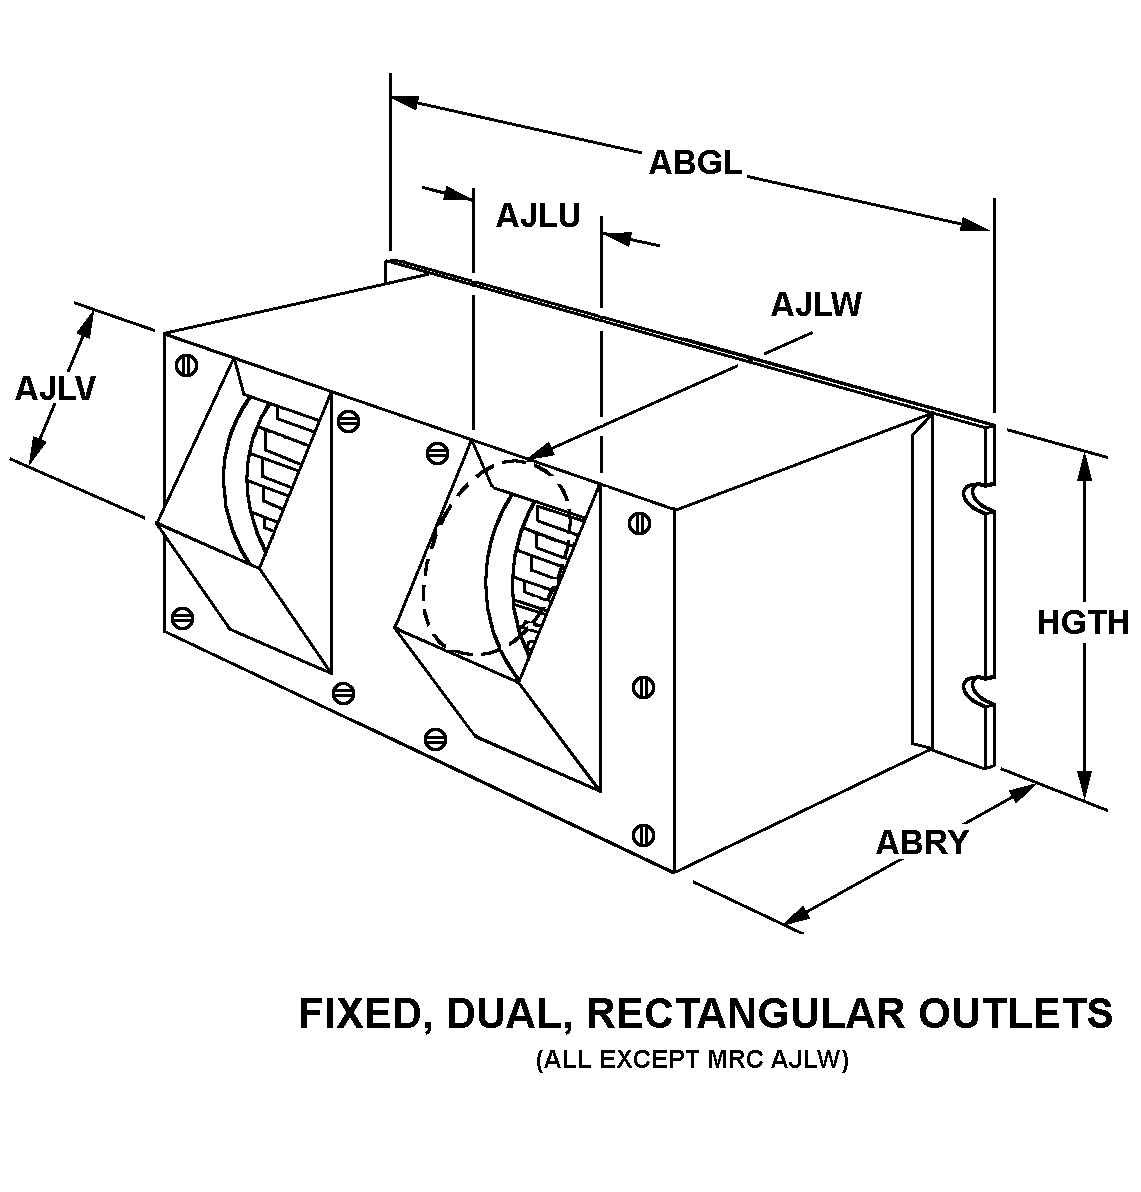 FIXED, DUAL, RECTANGULAR OUTLETS style nsn 4140-01-091-8671